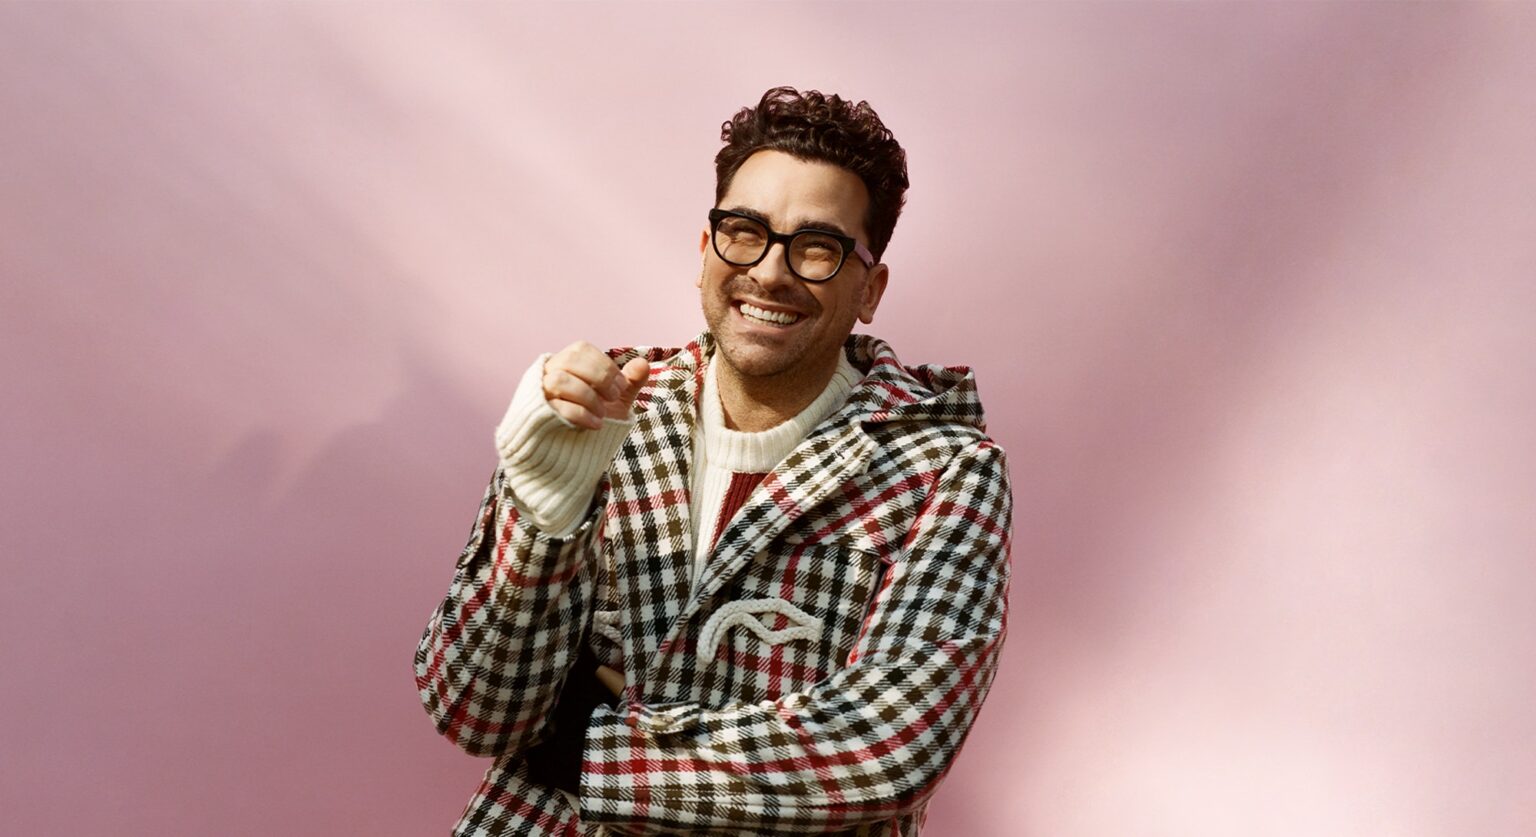 Dan Levy signs a first look deal with Netflix. Could this mean that we'll see more 'Schitt's Creek'? Read on to find out what's in the works.